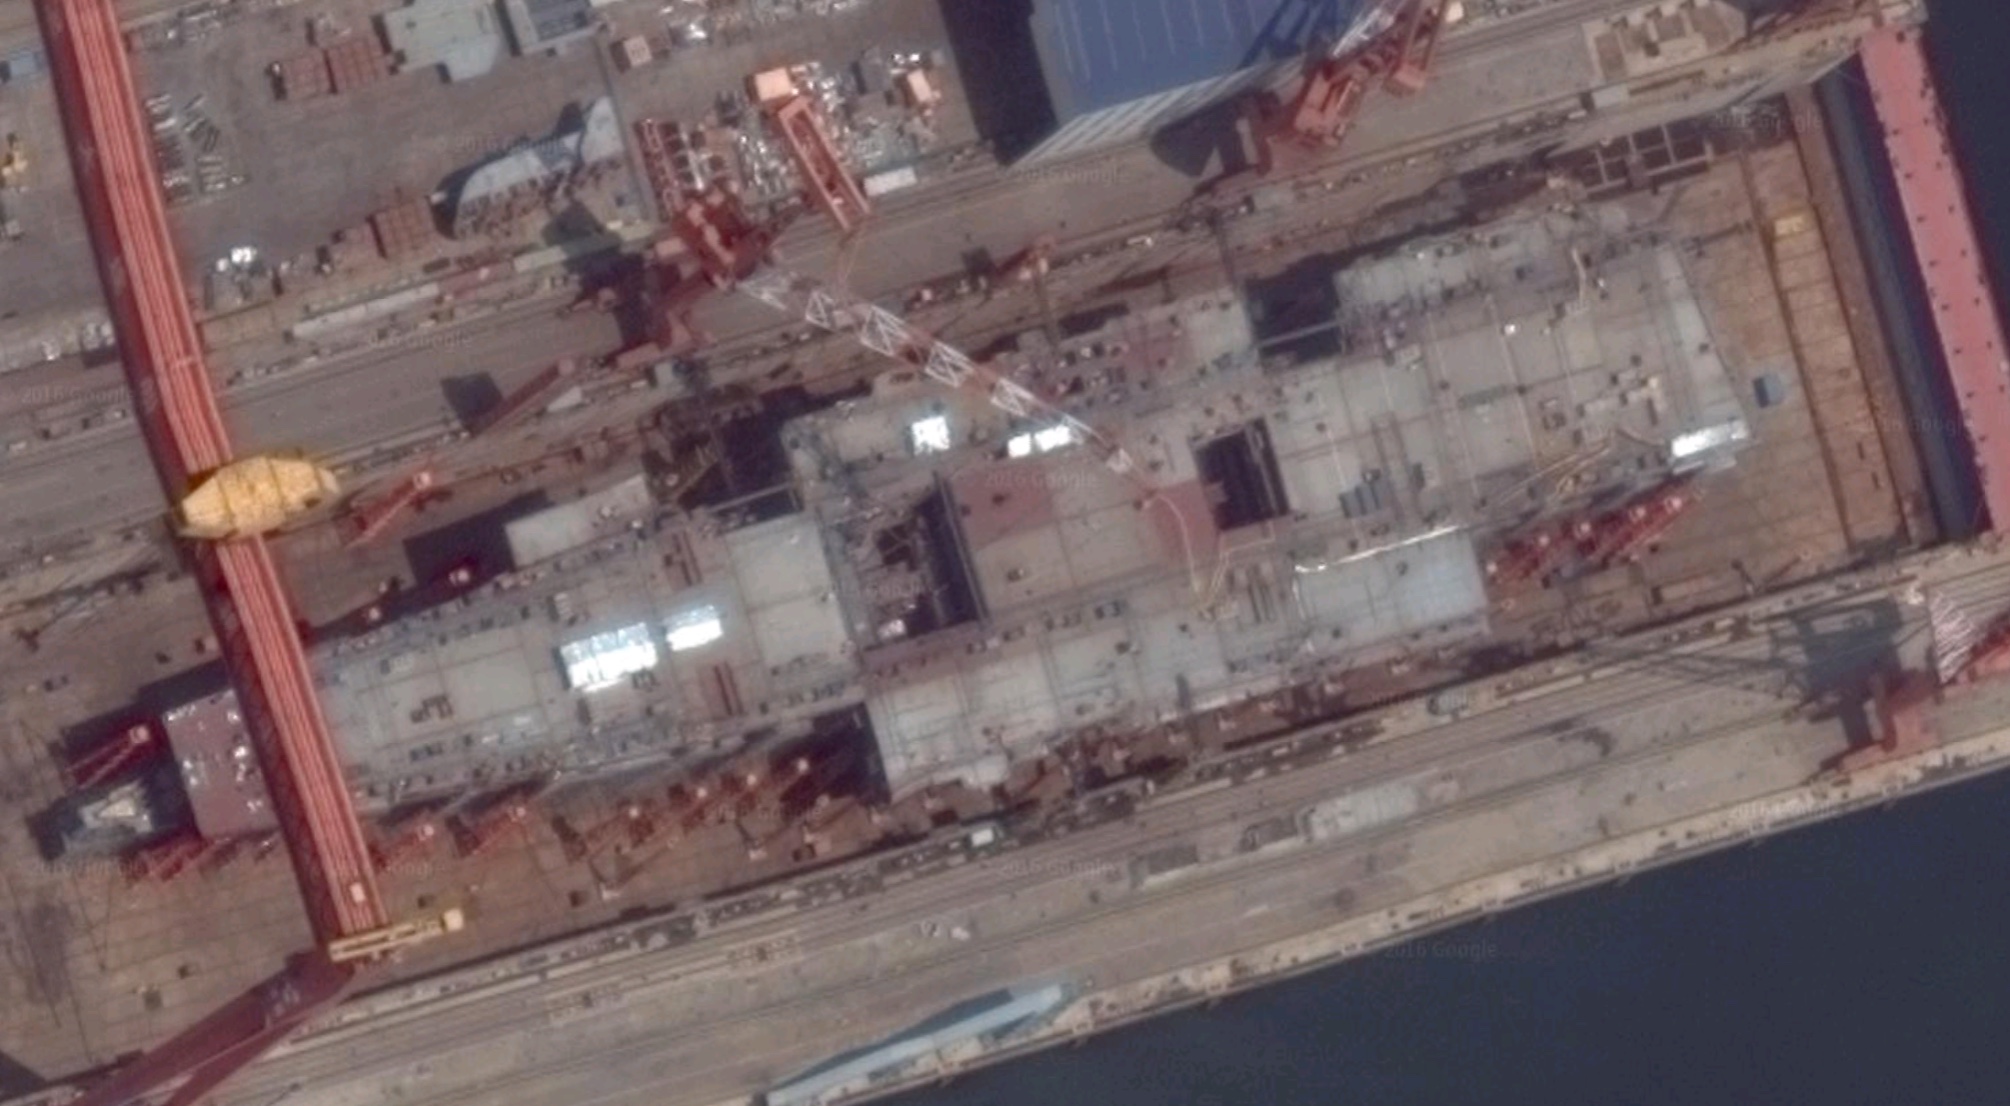 China's second aircraft carrier, CV17, seen under construction in dry dock in Dalian, Liaoning province, in mid 2016